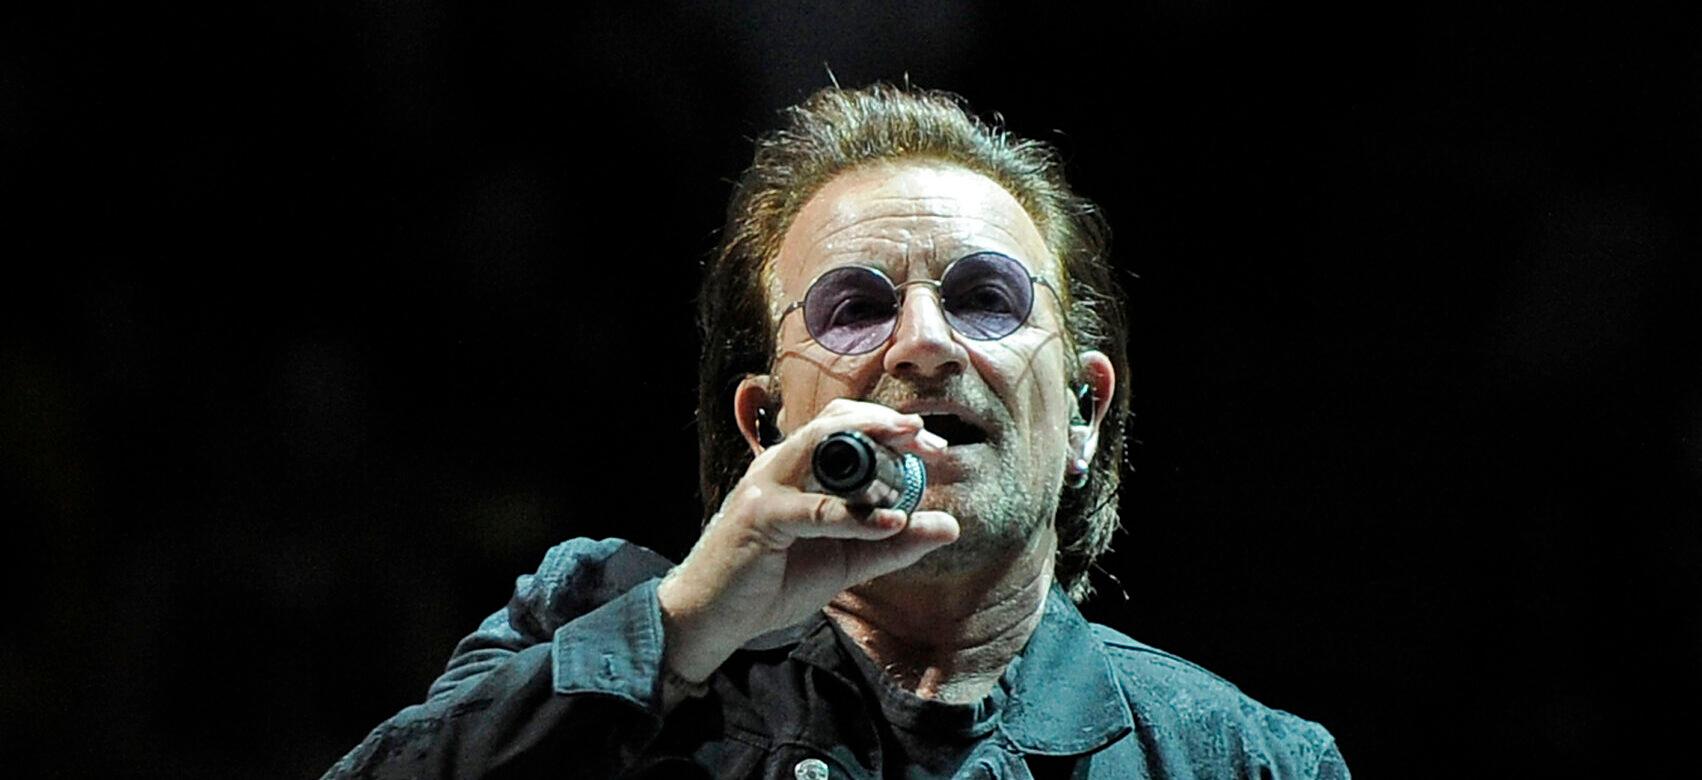 U2 Frontman Bono Expressed His Admiration For Sinèad O’Connor’s Talent